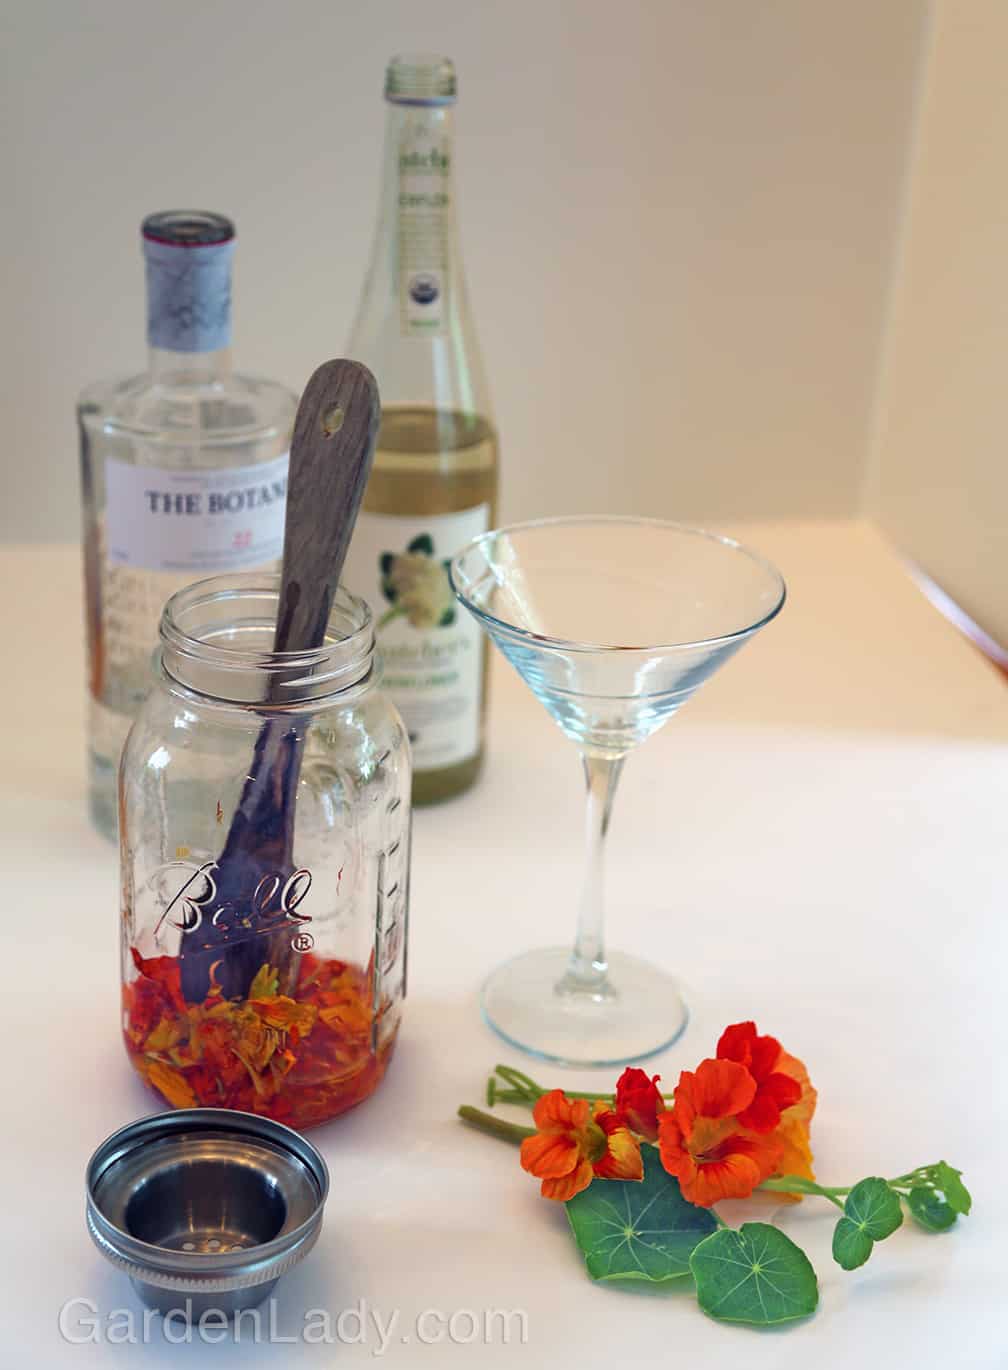 Muddle the flowers by smashing them with a wooden spoon, then add the liquids.